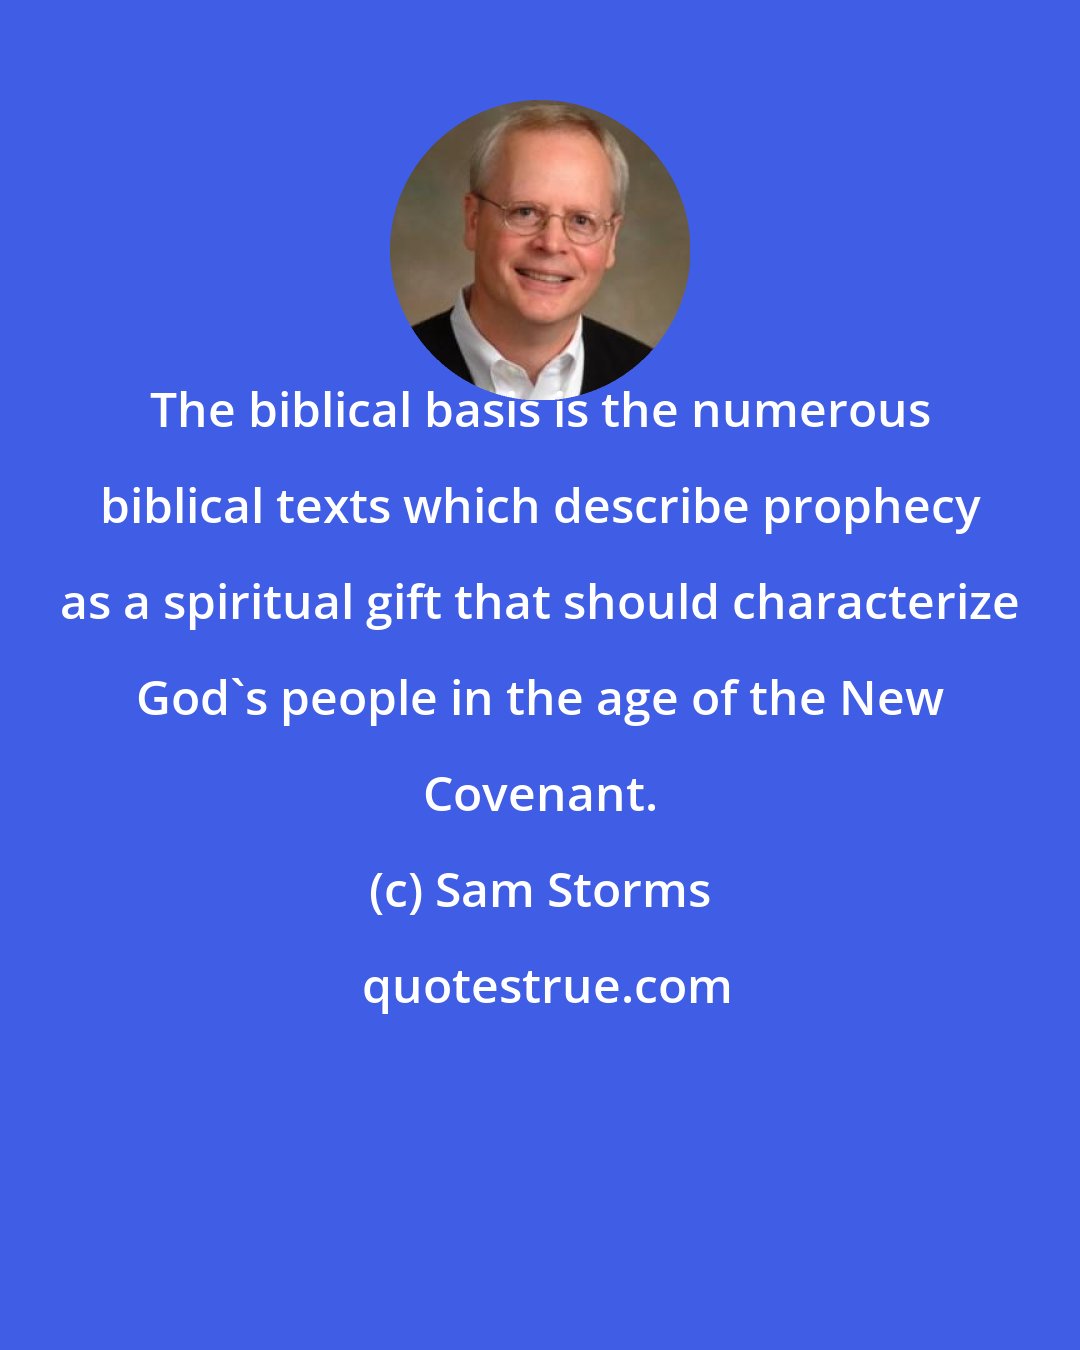 Sam Storms: The biblical basis is the numerous biblical texts which describe prophecy as a spiritual gift that should characterize God's people in the age of the New Covenant.